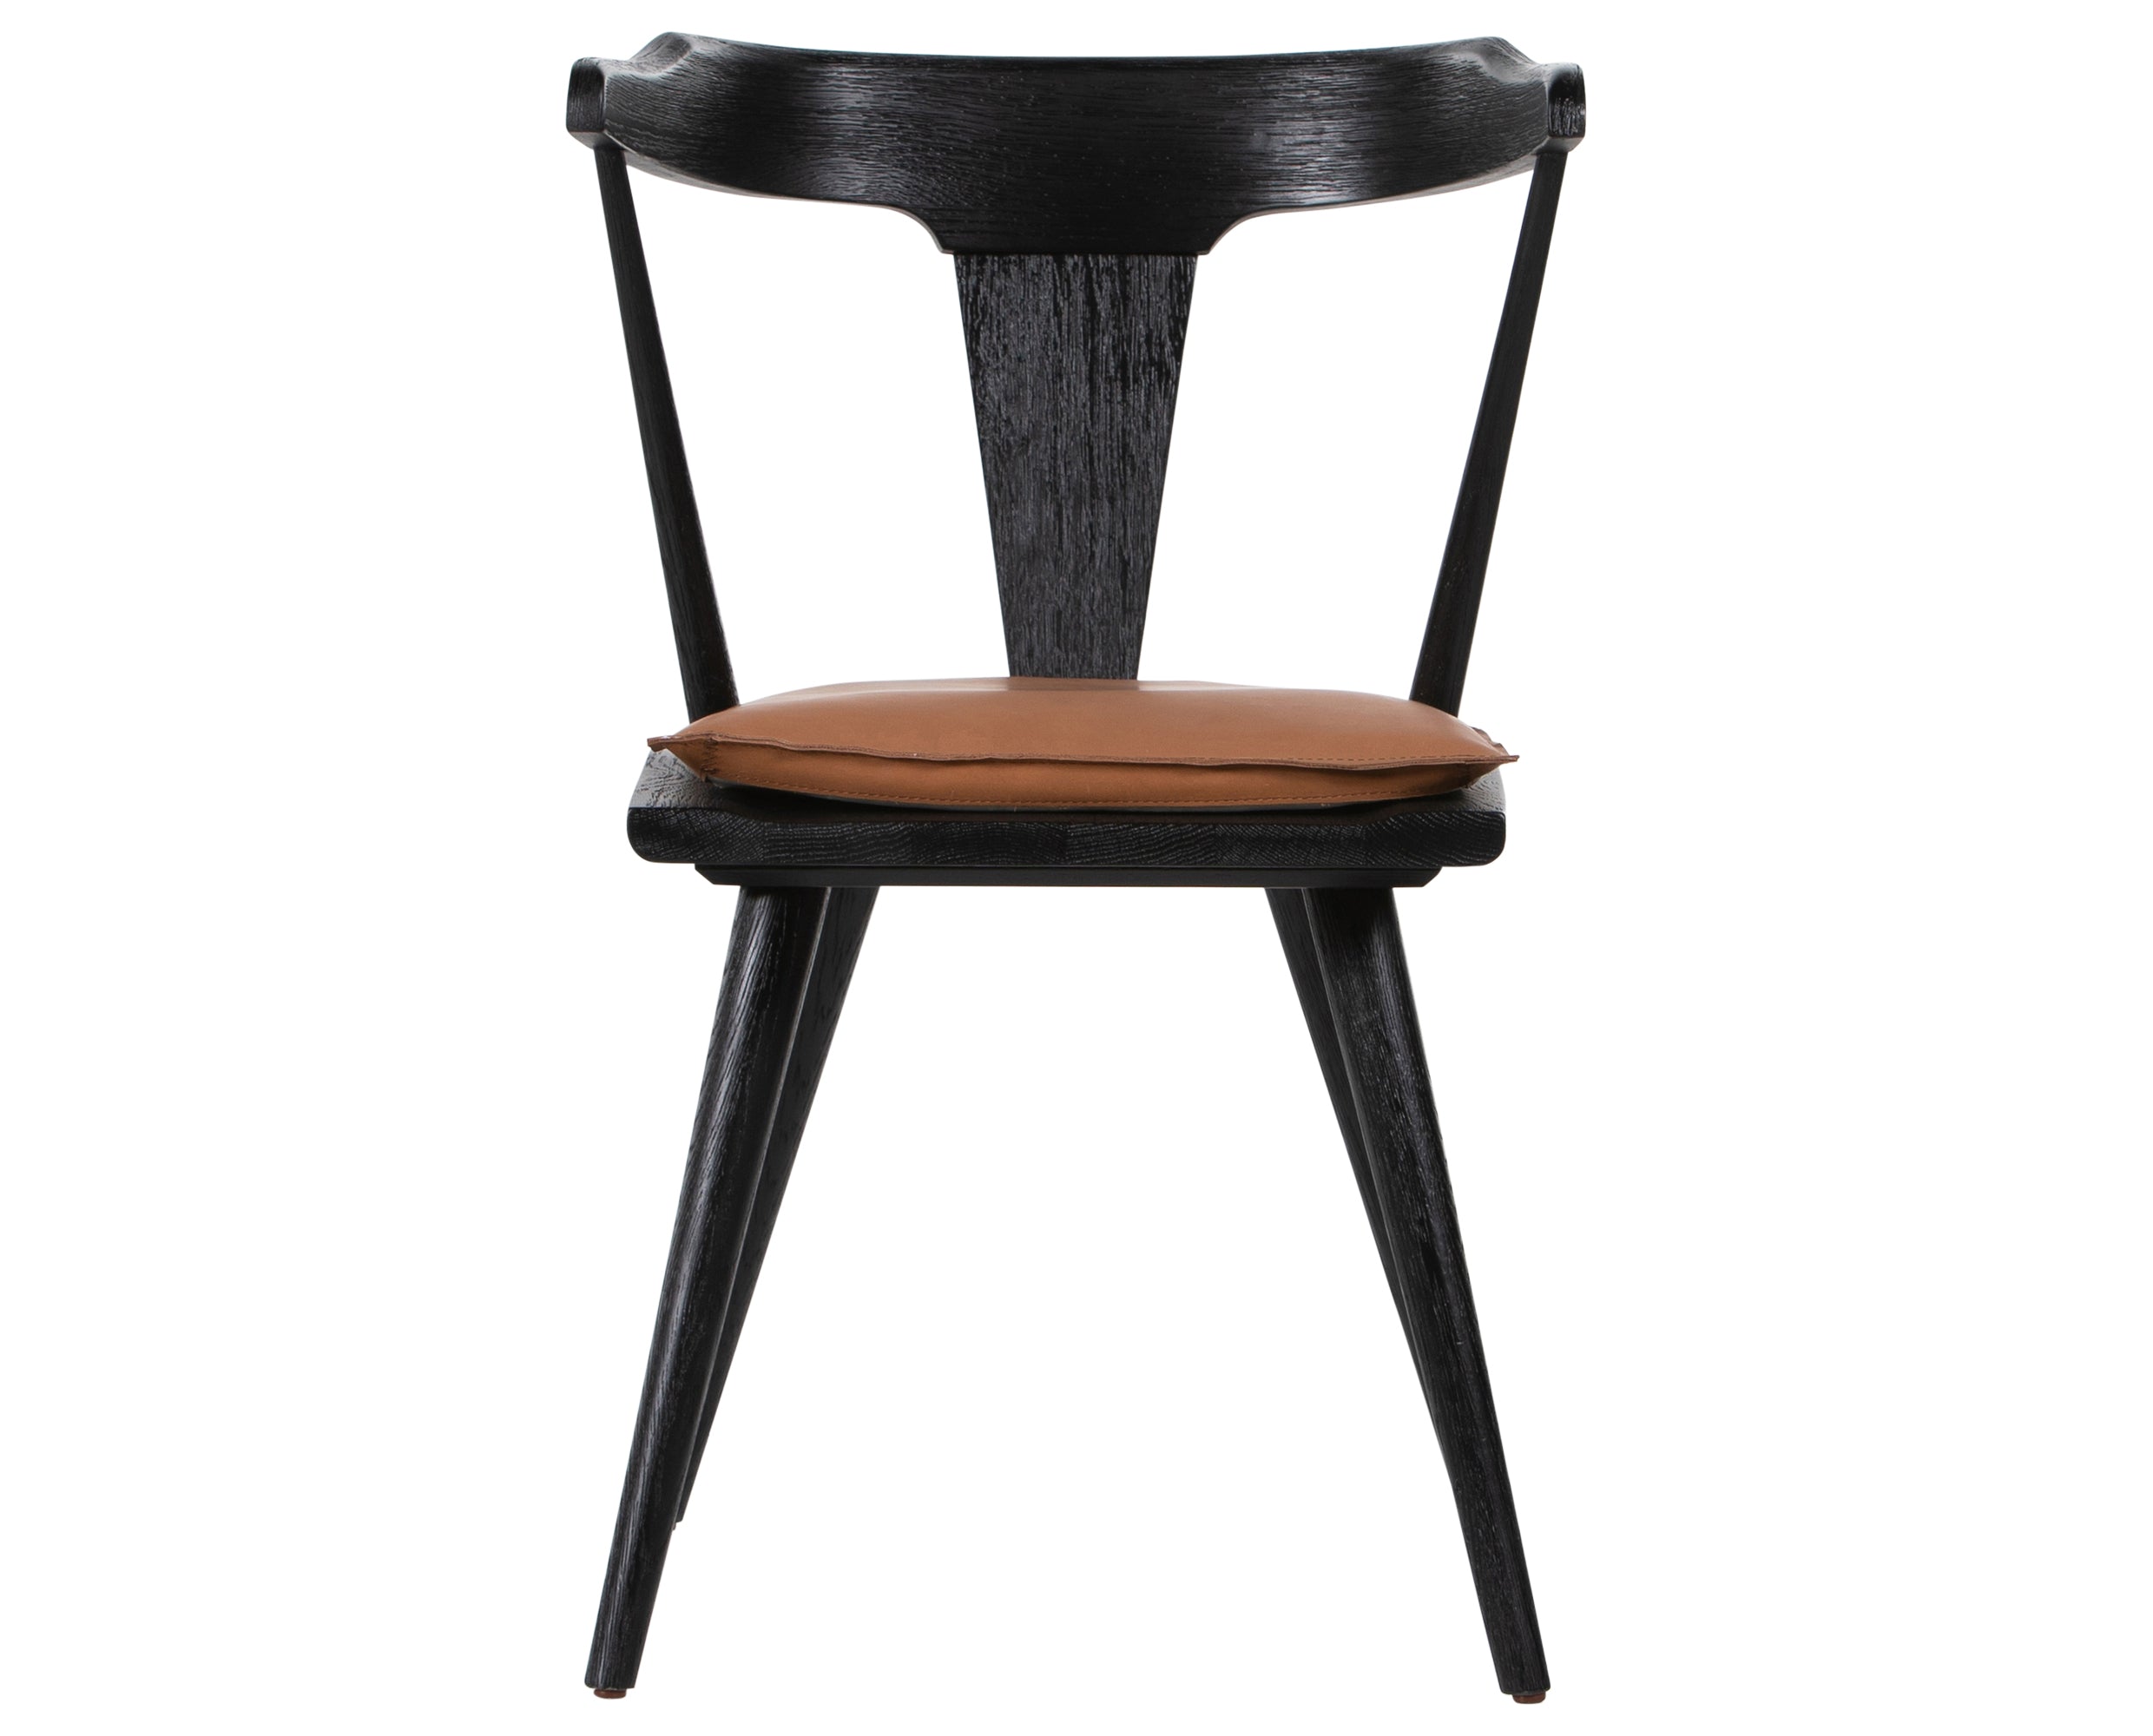 Black Oak and Whiskey Saddle Leather with Ivory Backing Fabric | Ripley Dining Chair | Valley Ridge Furniture